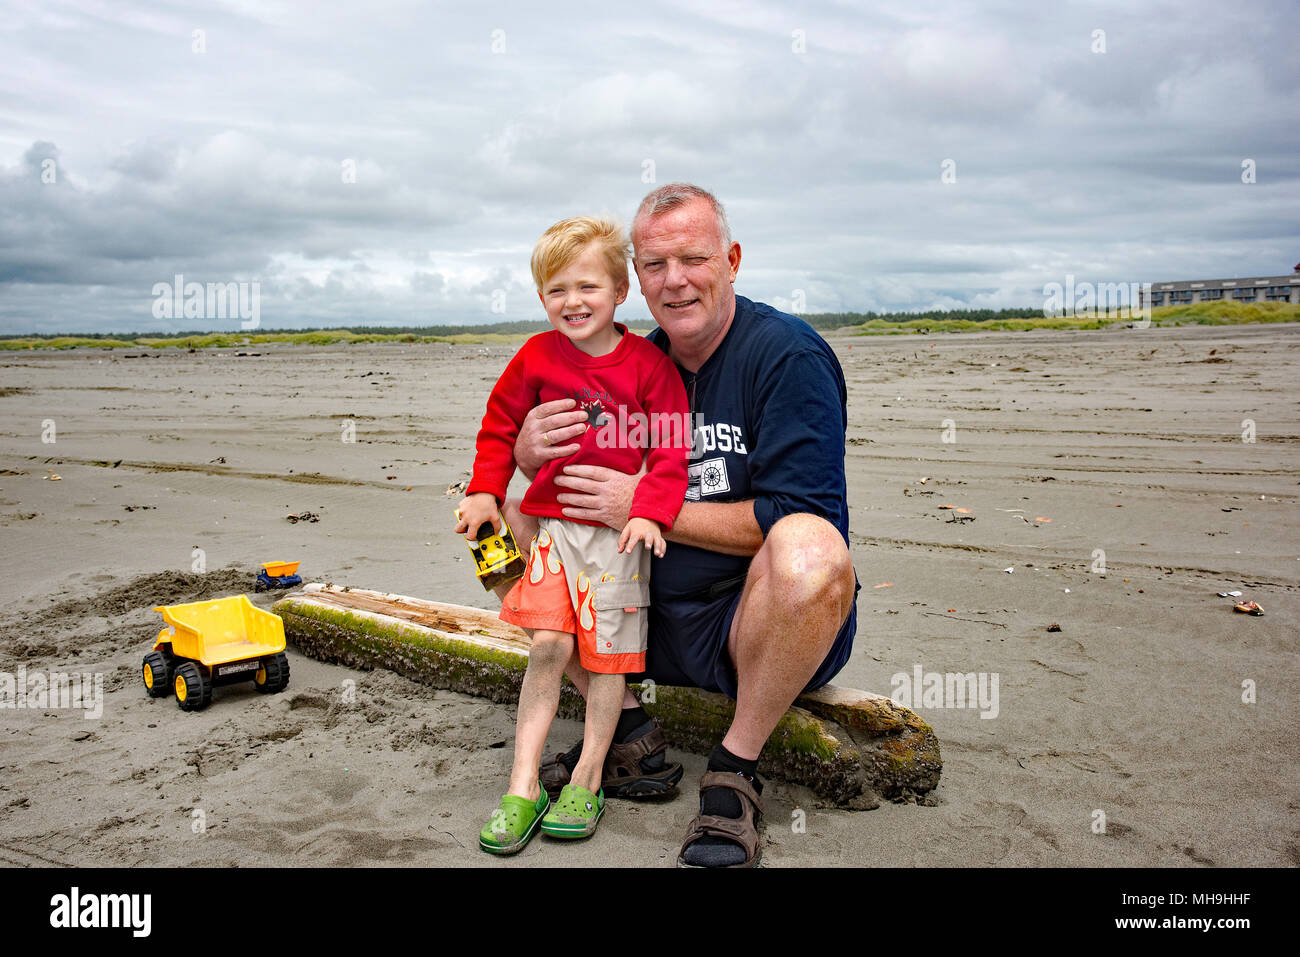 Family enjoying some relaxing vacation time on the beautiful beach of Ocean Shores, Washington, U.S.A. Stock Photo